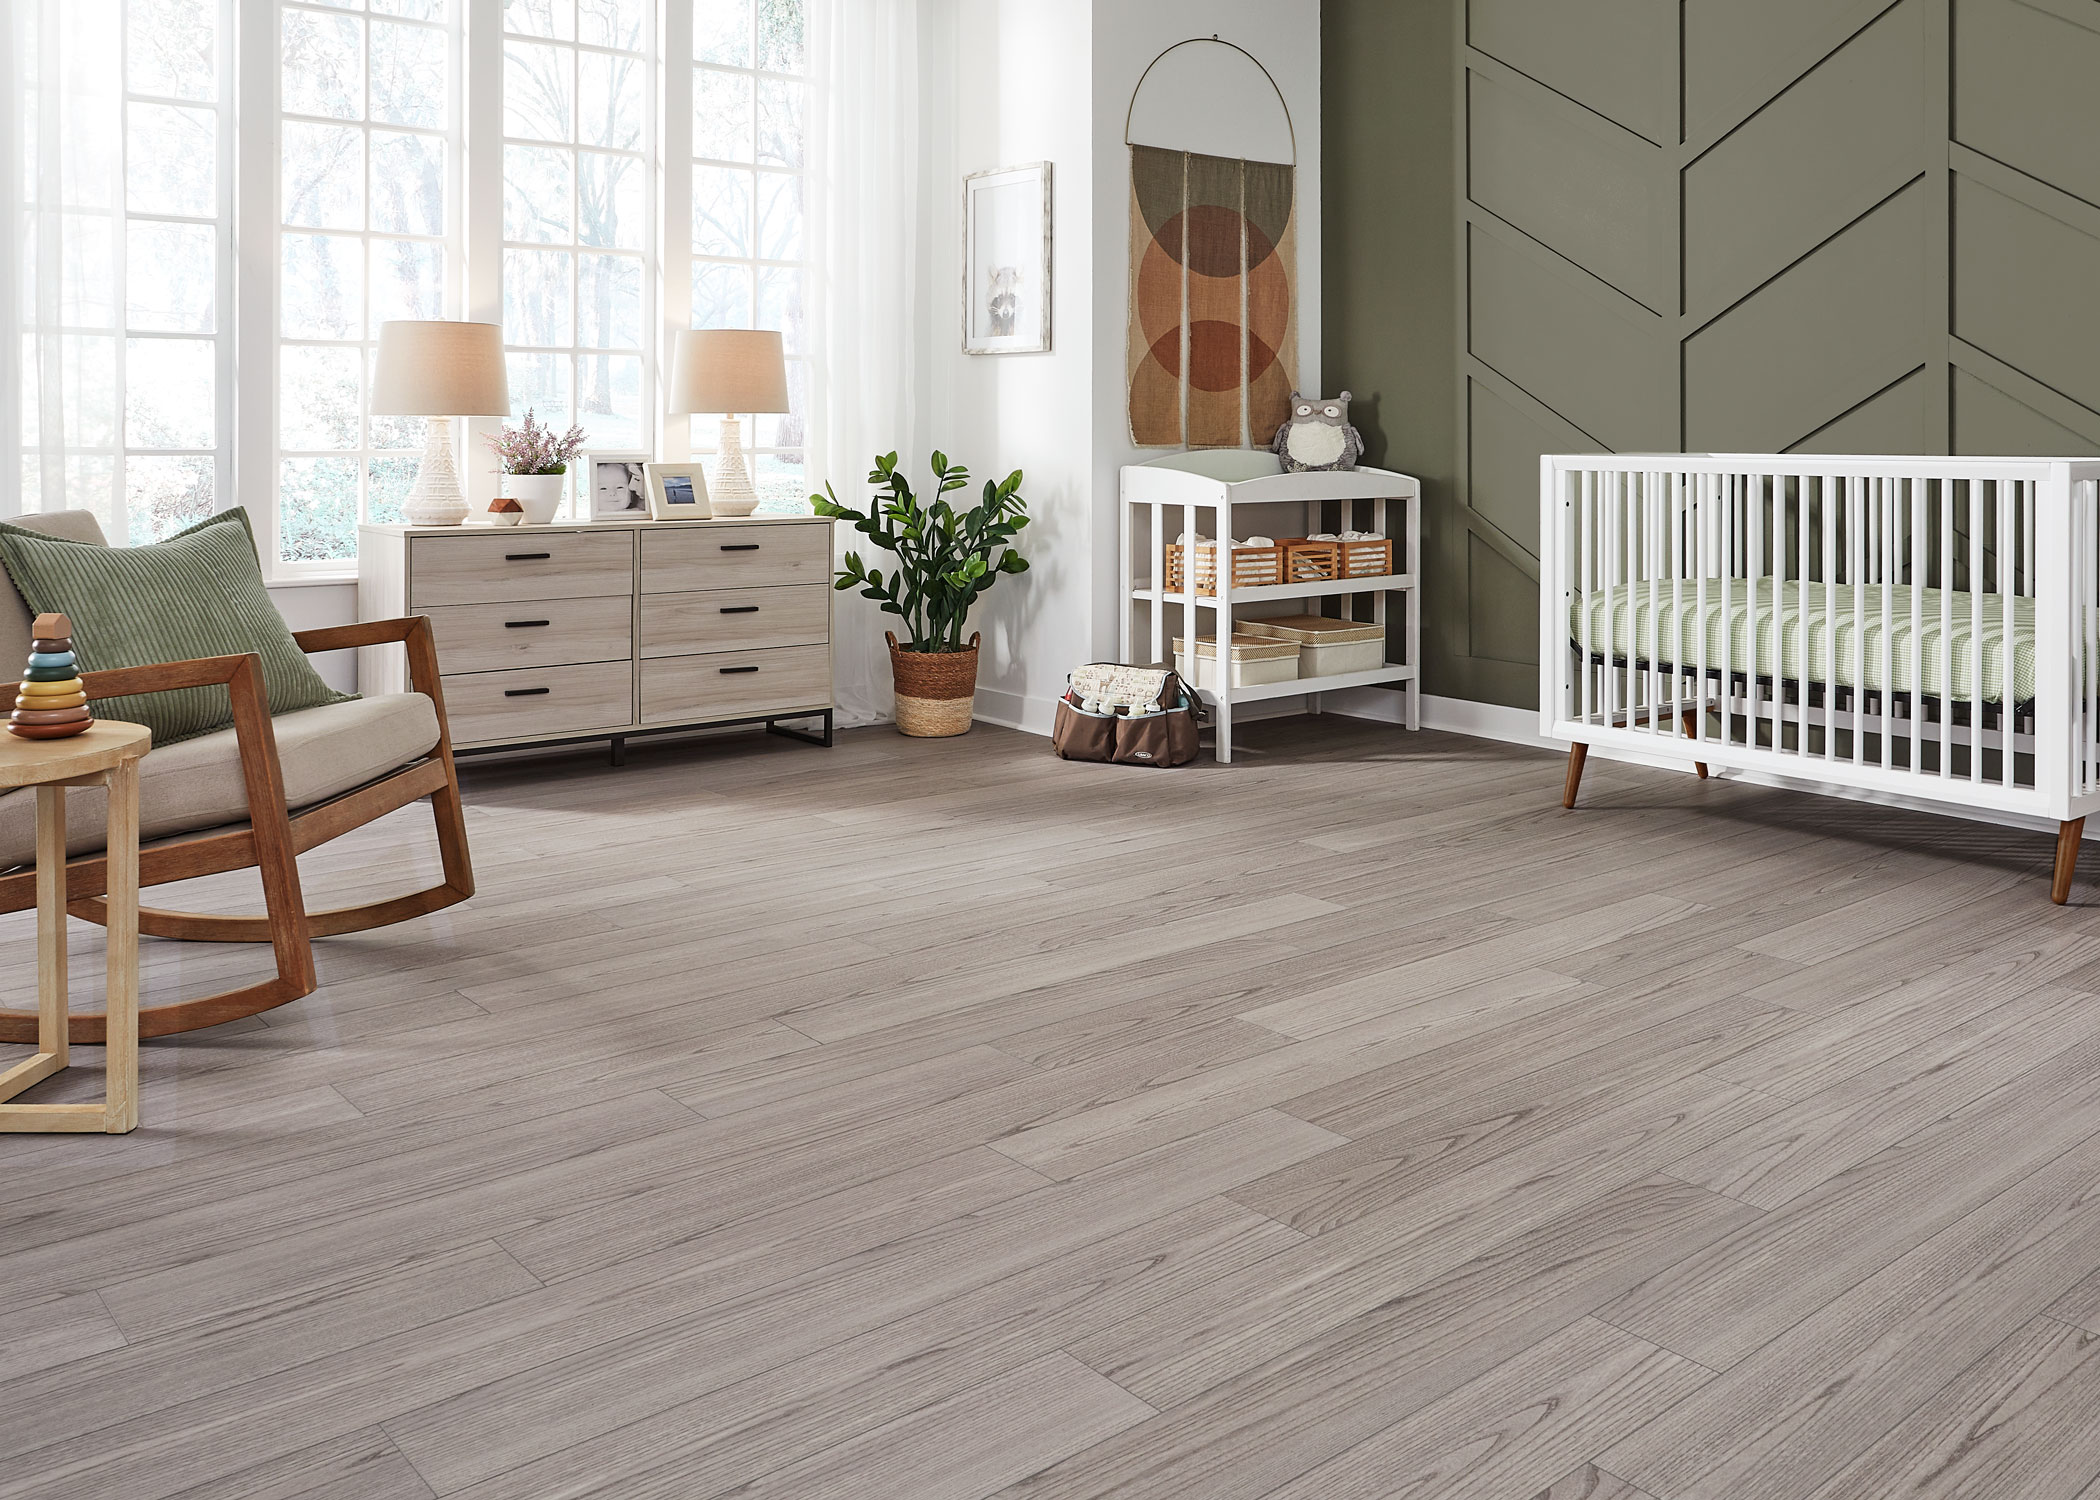 beige waterproof rigid vinyl plank floor in nursery with green accent wall plus white crib and wood rocking chair